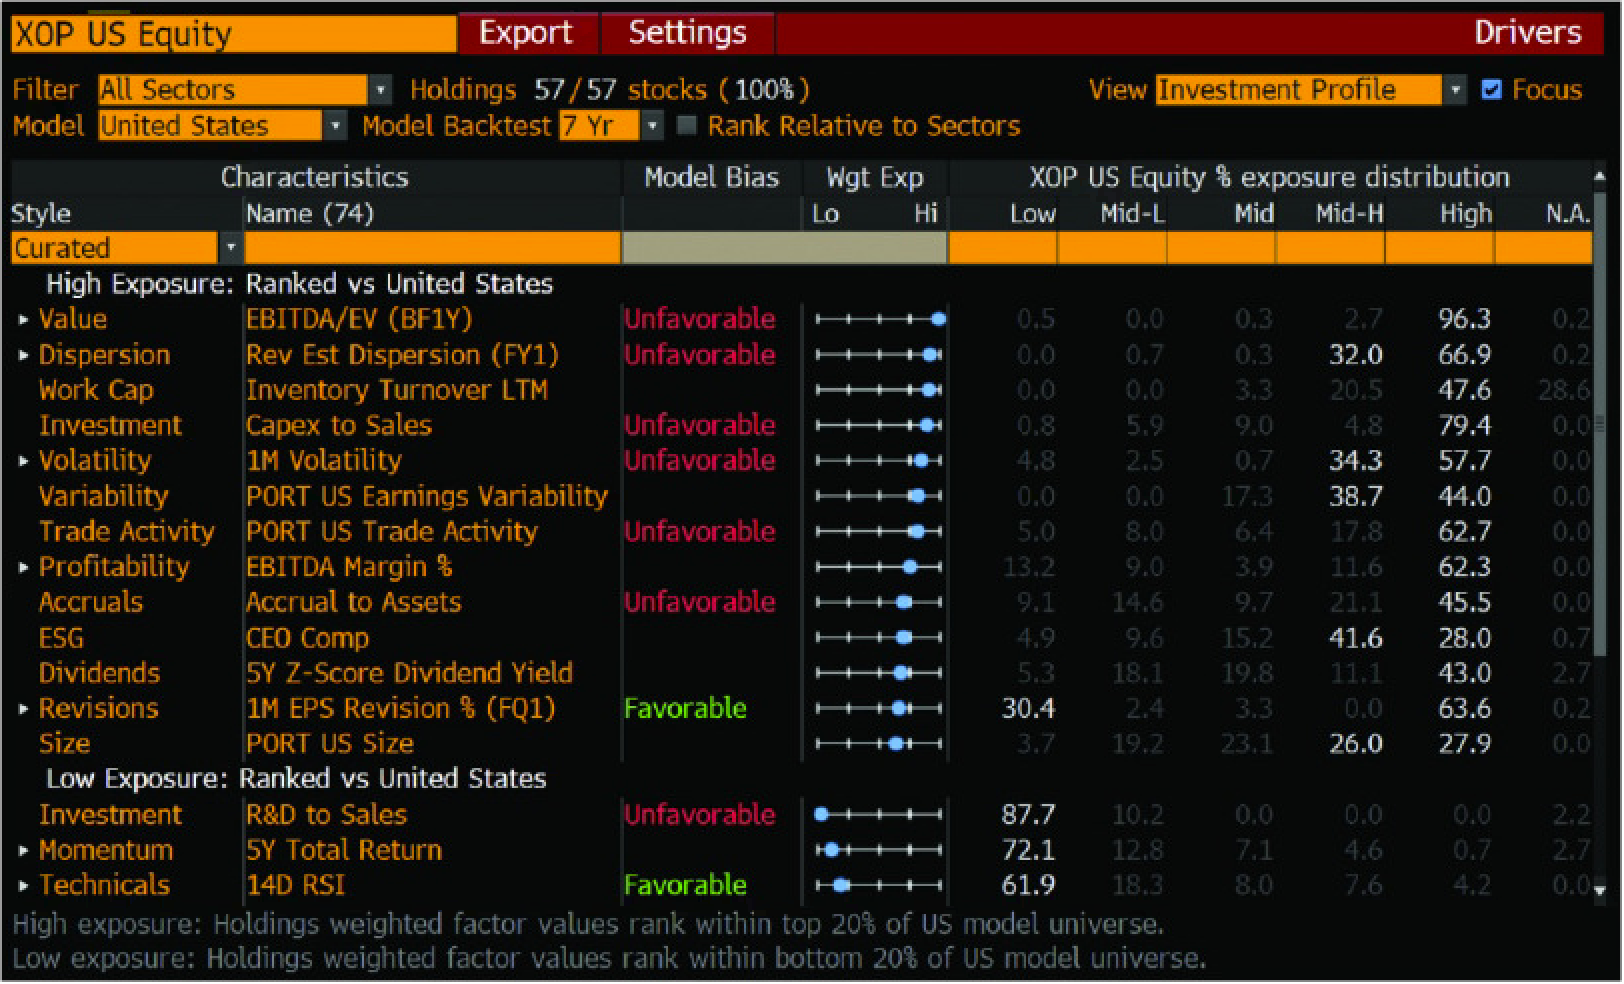 You can [evaluate trade ideas and entire portfolios](https://www.bloomberg.com/professional/blog/here-are-some-key-tools-for-exploring-an-investment-idea/) using a wide range of factors and anomalies on your Bloomberg.